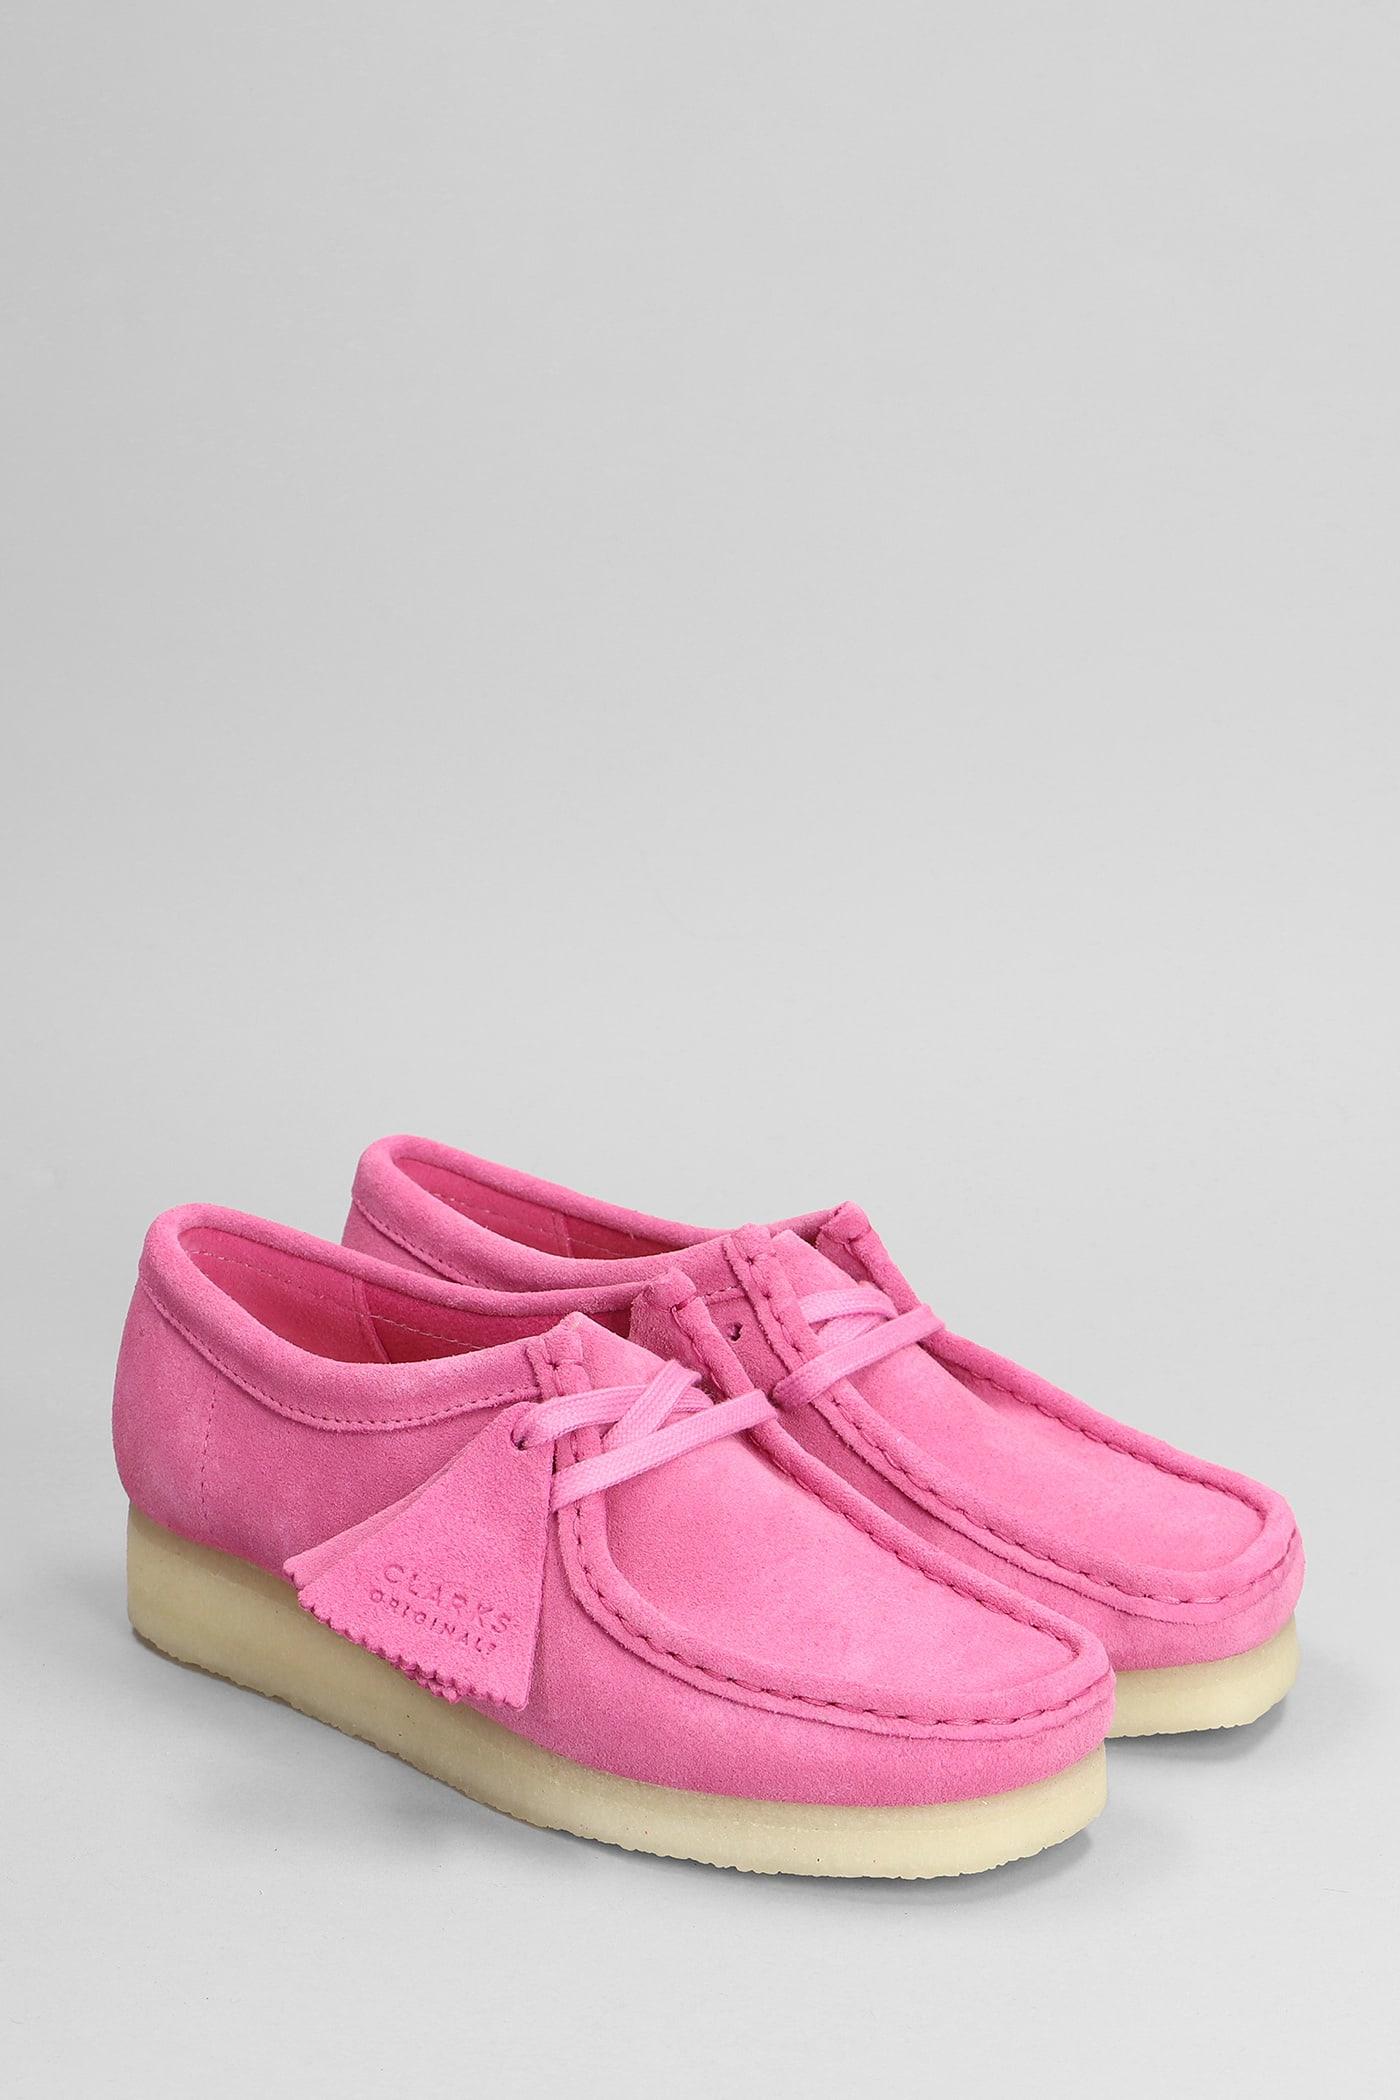 Clarks Wallabee Lace Up Shoes In Rose-pink Suede | Lyst